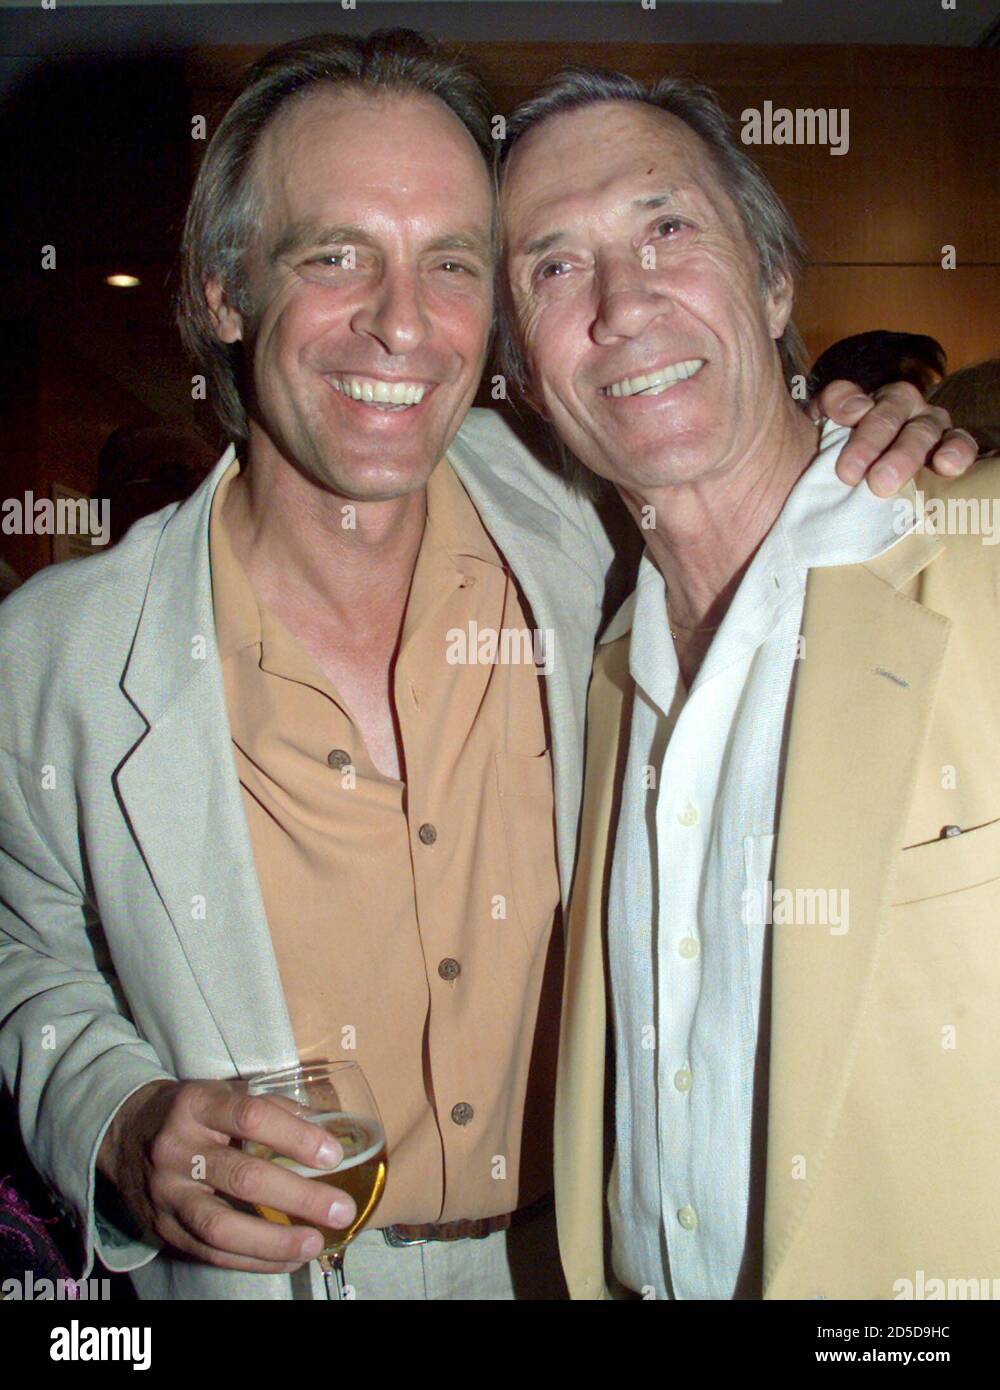 Actor Keith Carradine (L), poses with his brother, actor David Carradine,  at a special 25th anniversary screening of the film "Nashville" June 22 in  Beverly Hills. [Keith Carradine portrayed Tom Frank in